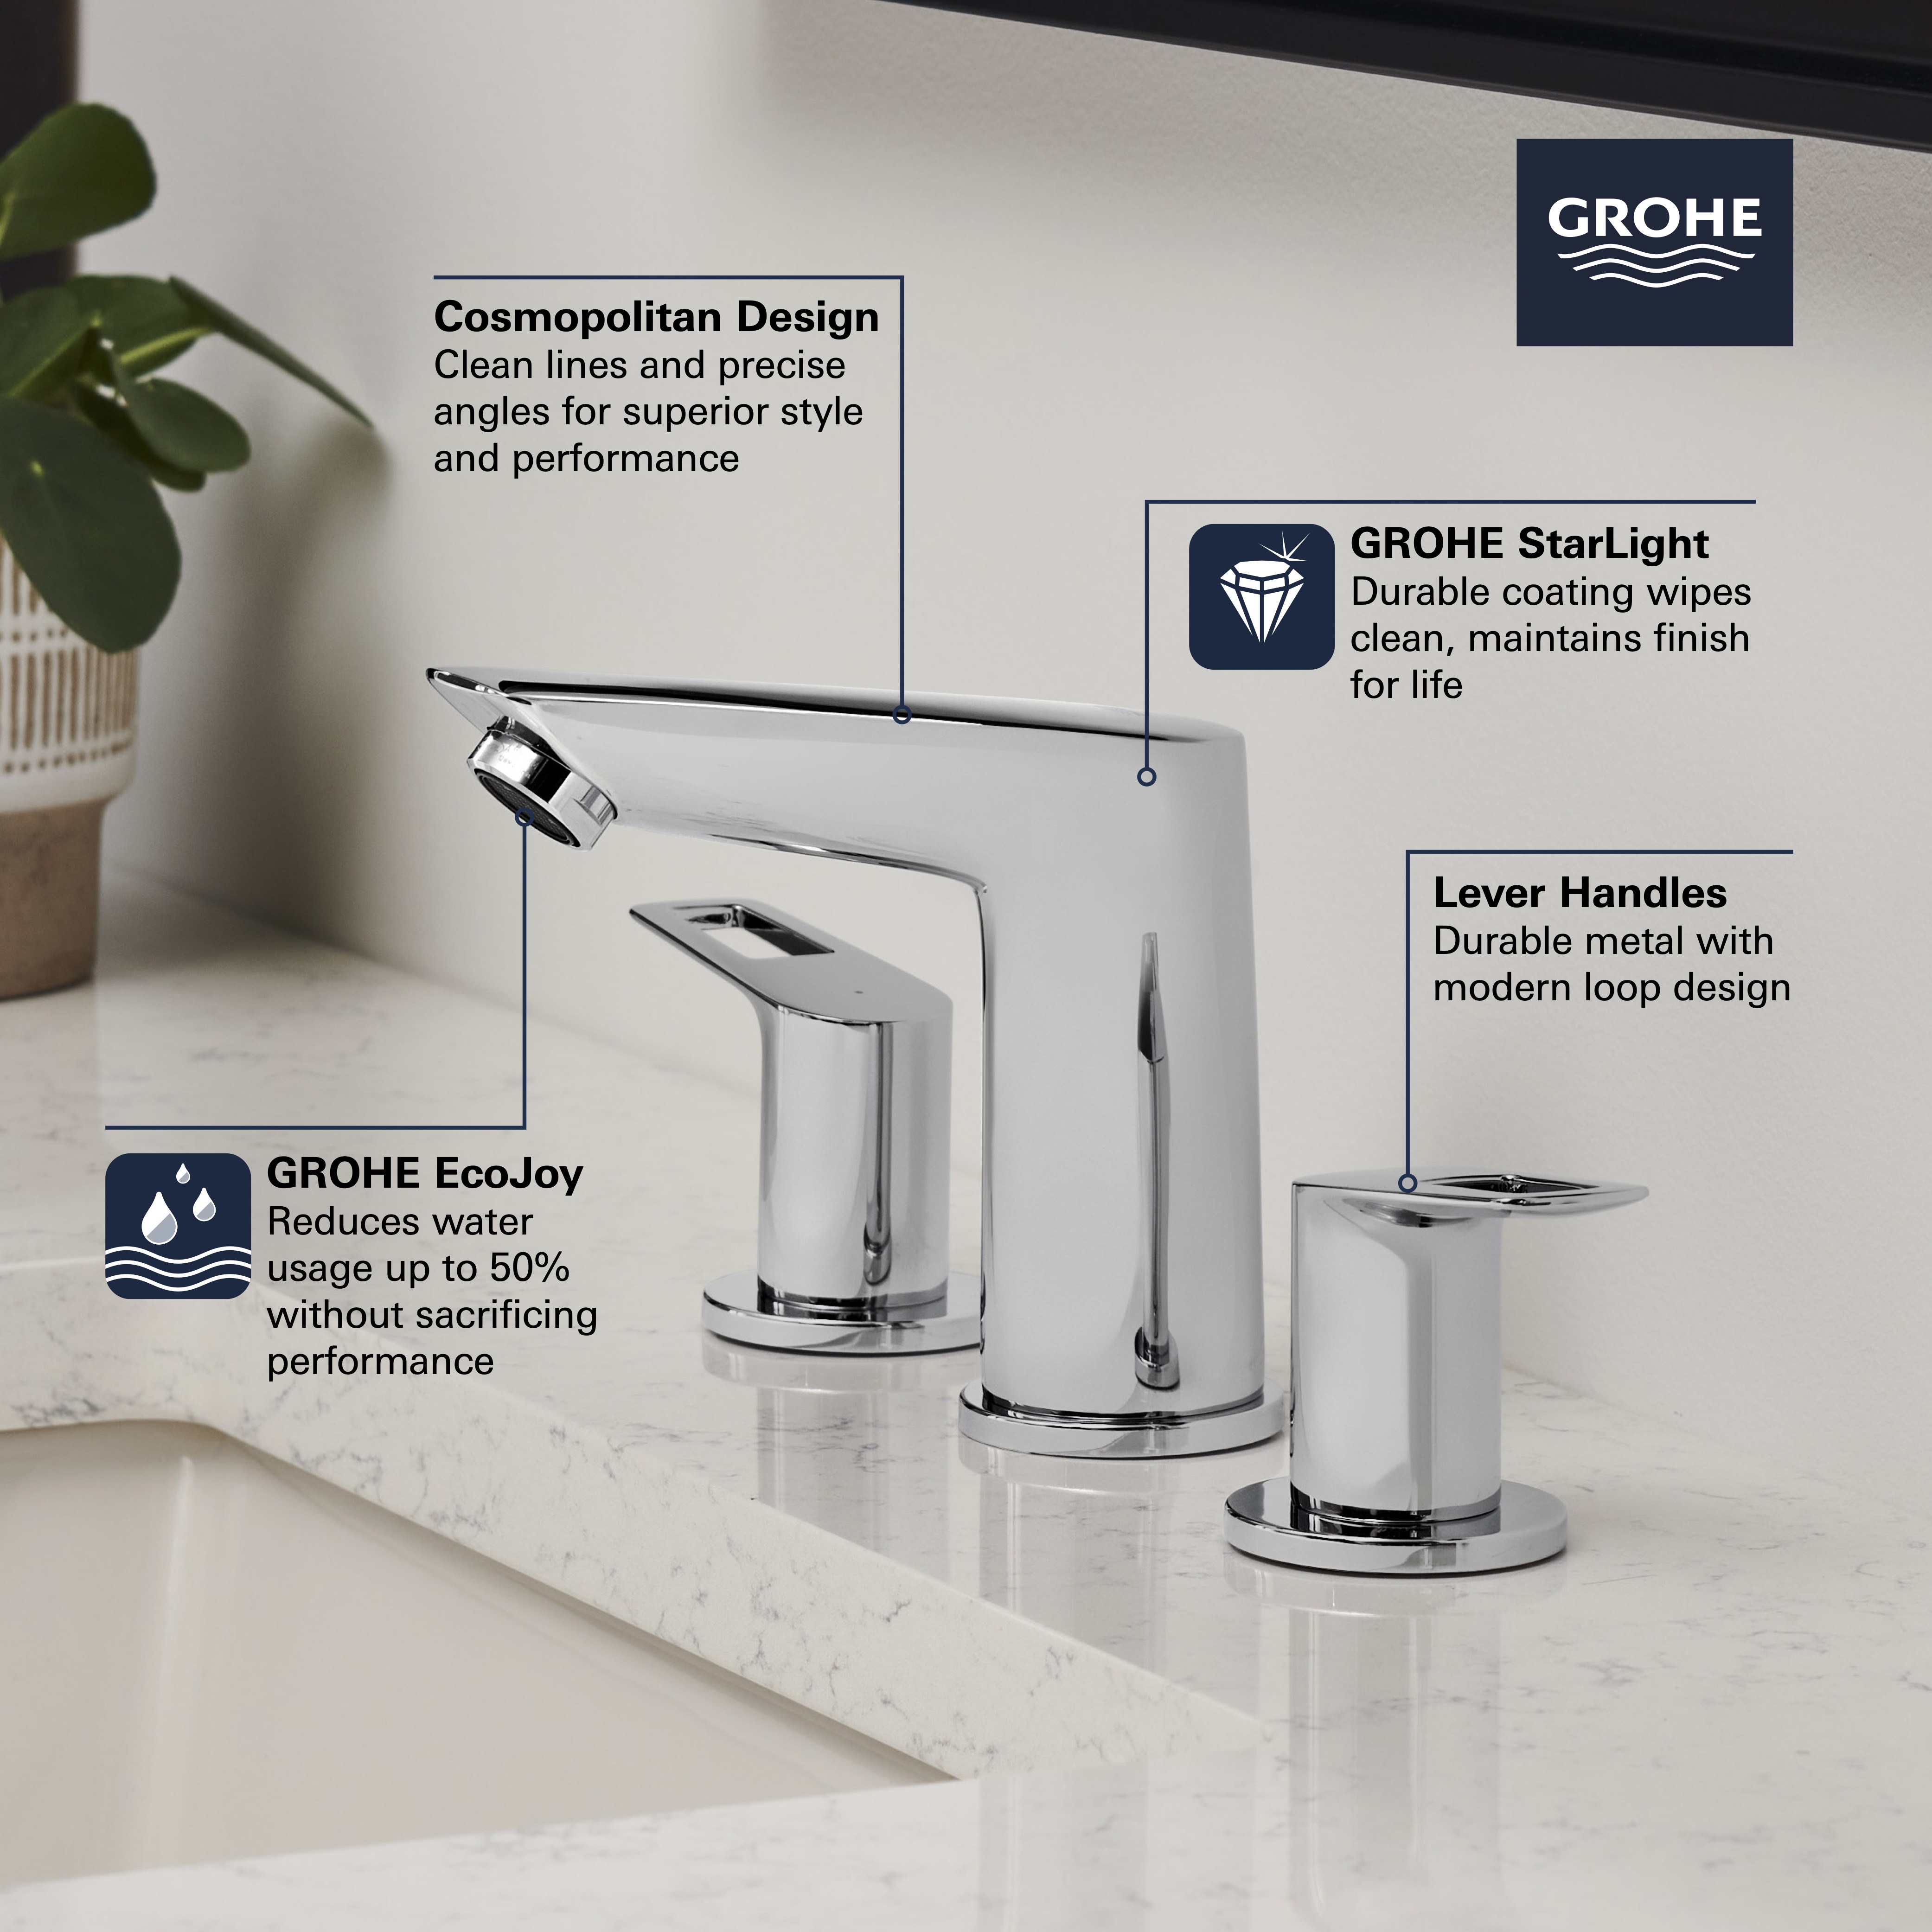 GROHE 23085001 Bauloop, Single Hole Single-Handle S-Size Bathroom Faucet  1.2 GPM - Drain not included, Chrome